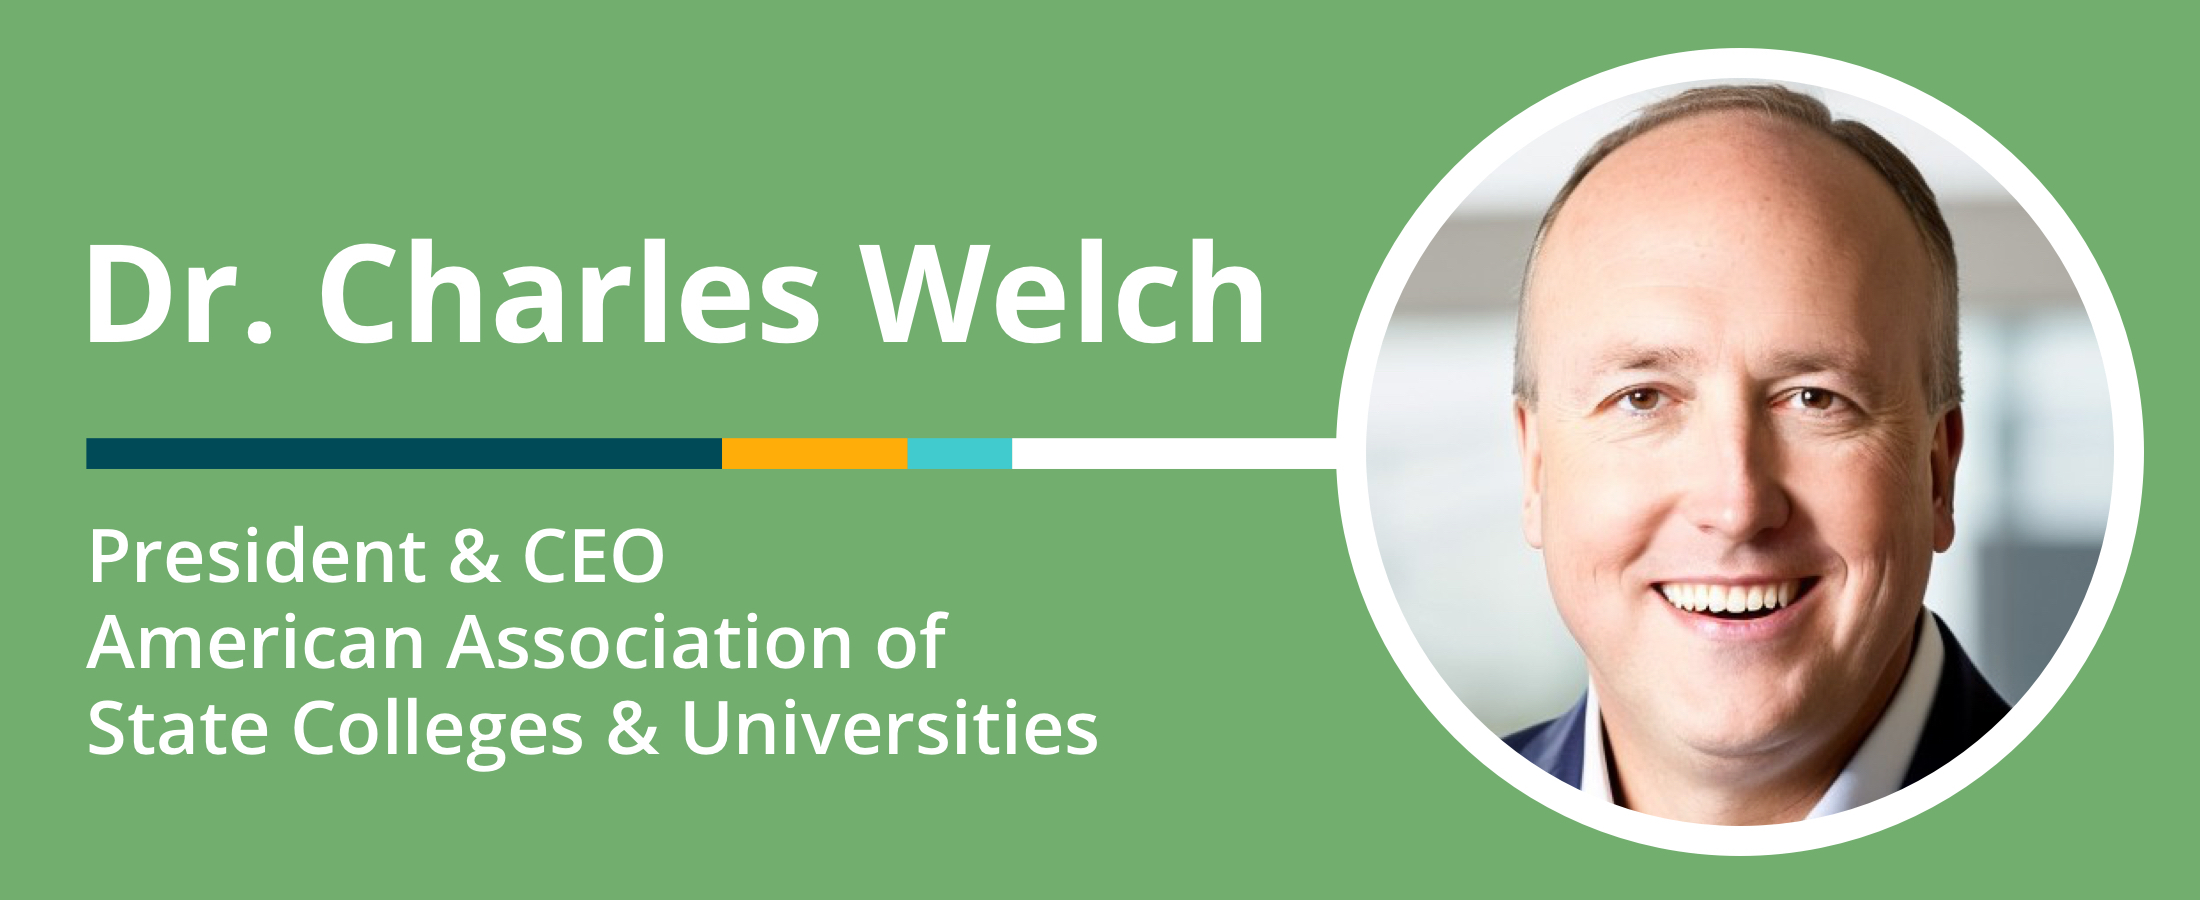 Dr. Charles Welch, president and CEO of American Association of State Colleges and Universities